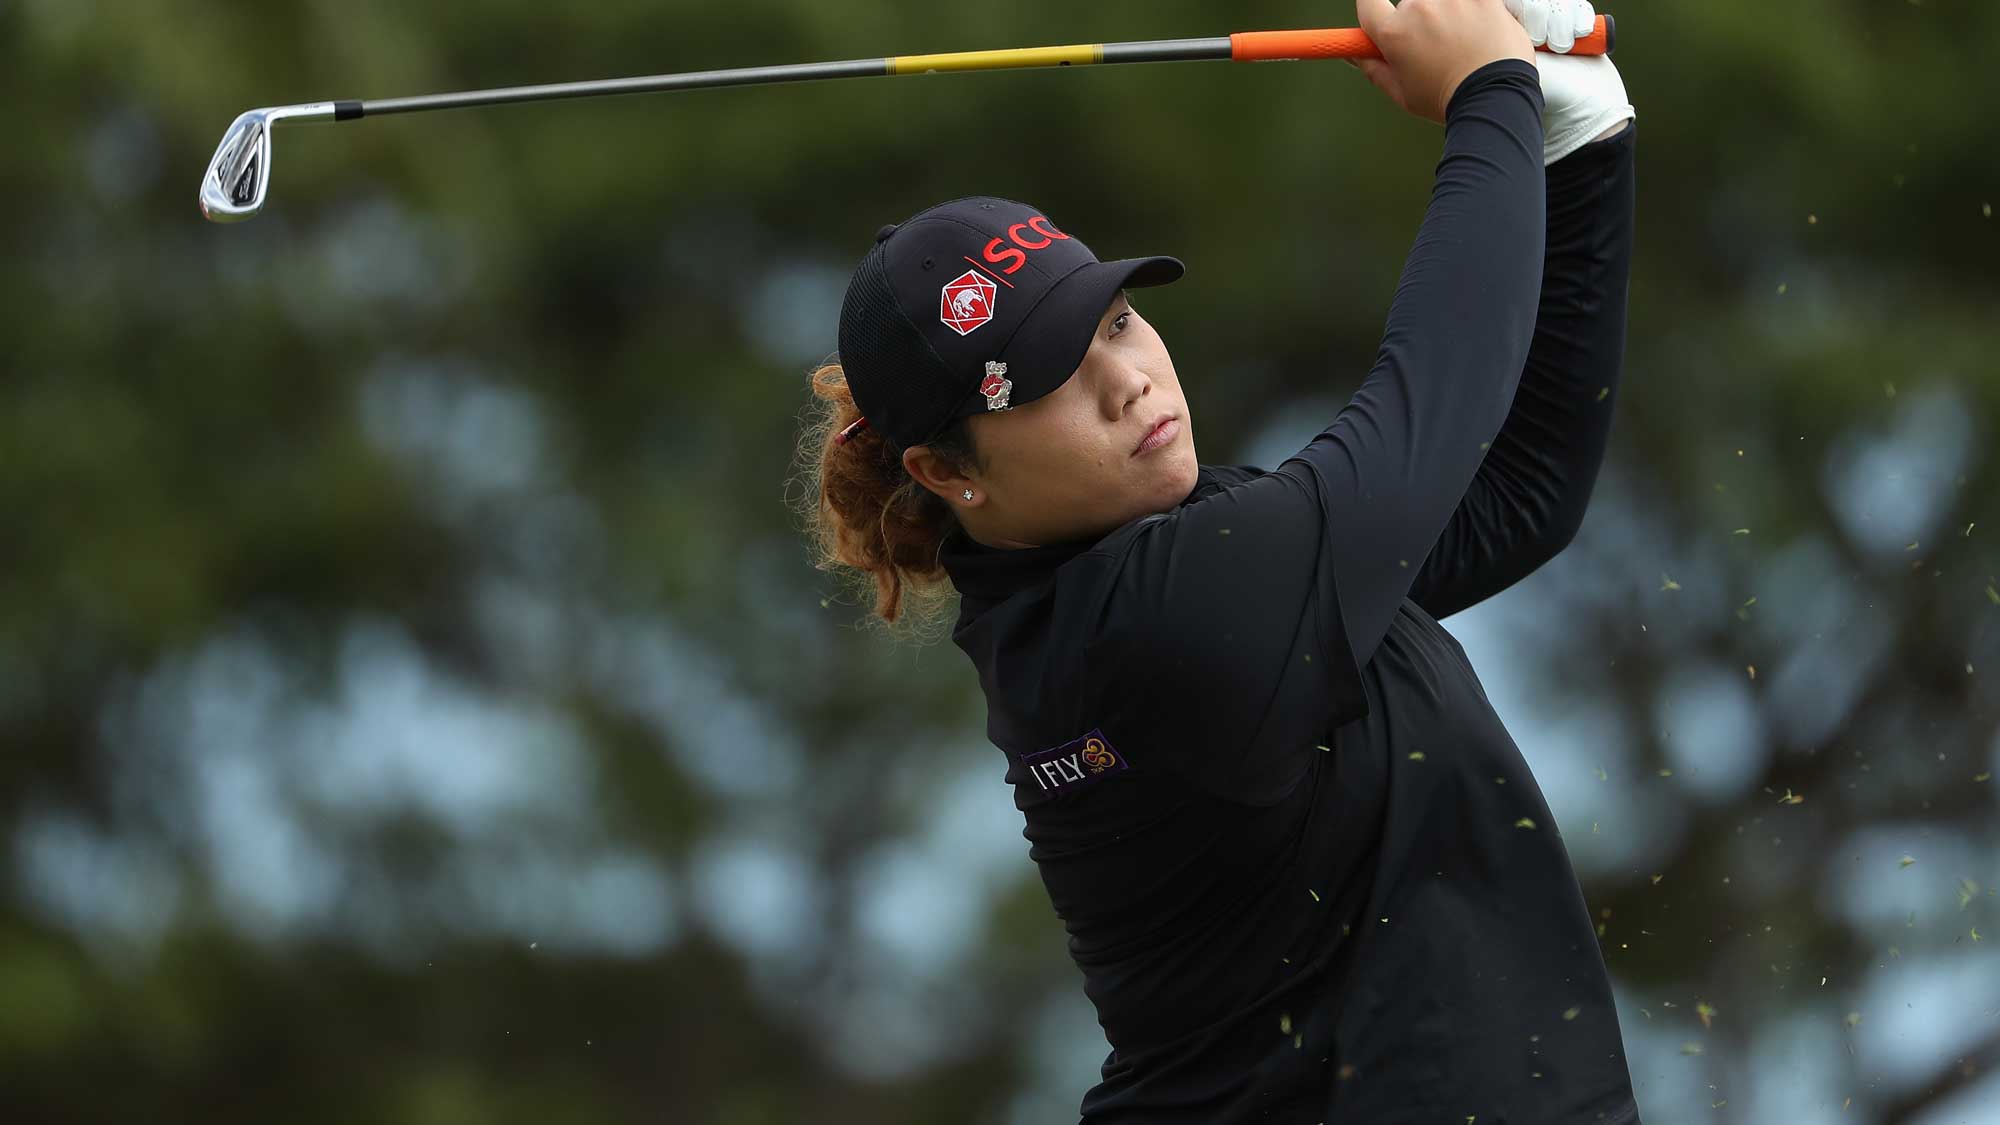 Ariya Jutanugarn of Thailand plays a tee shot on the ninth hole during the third round of the LPGA LOTTE Championship Presented By Hershey